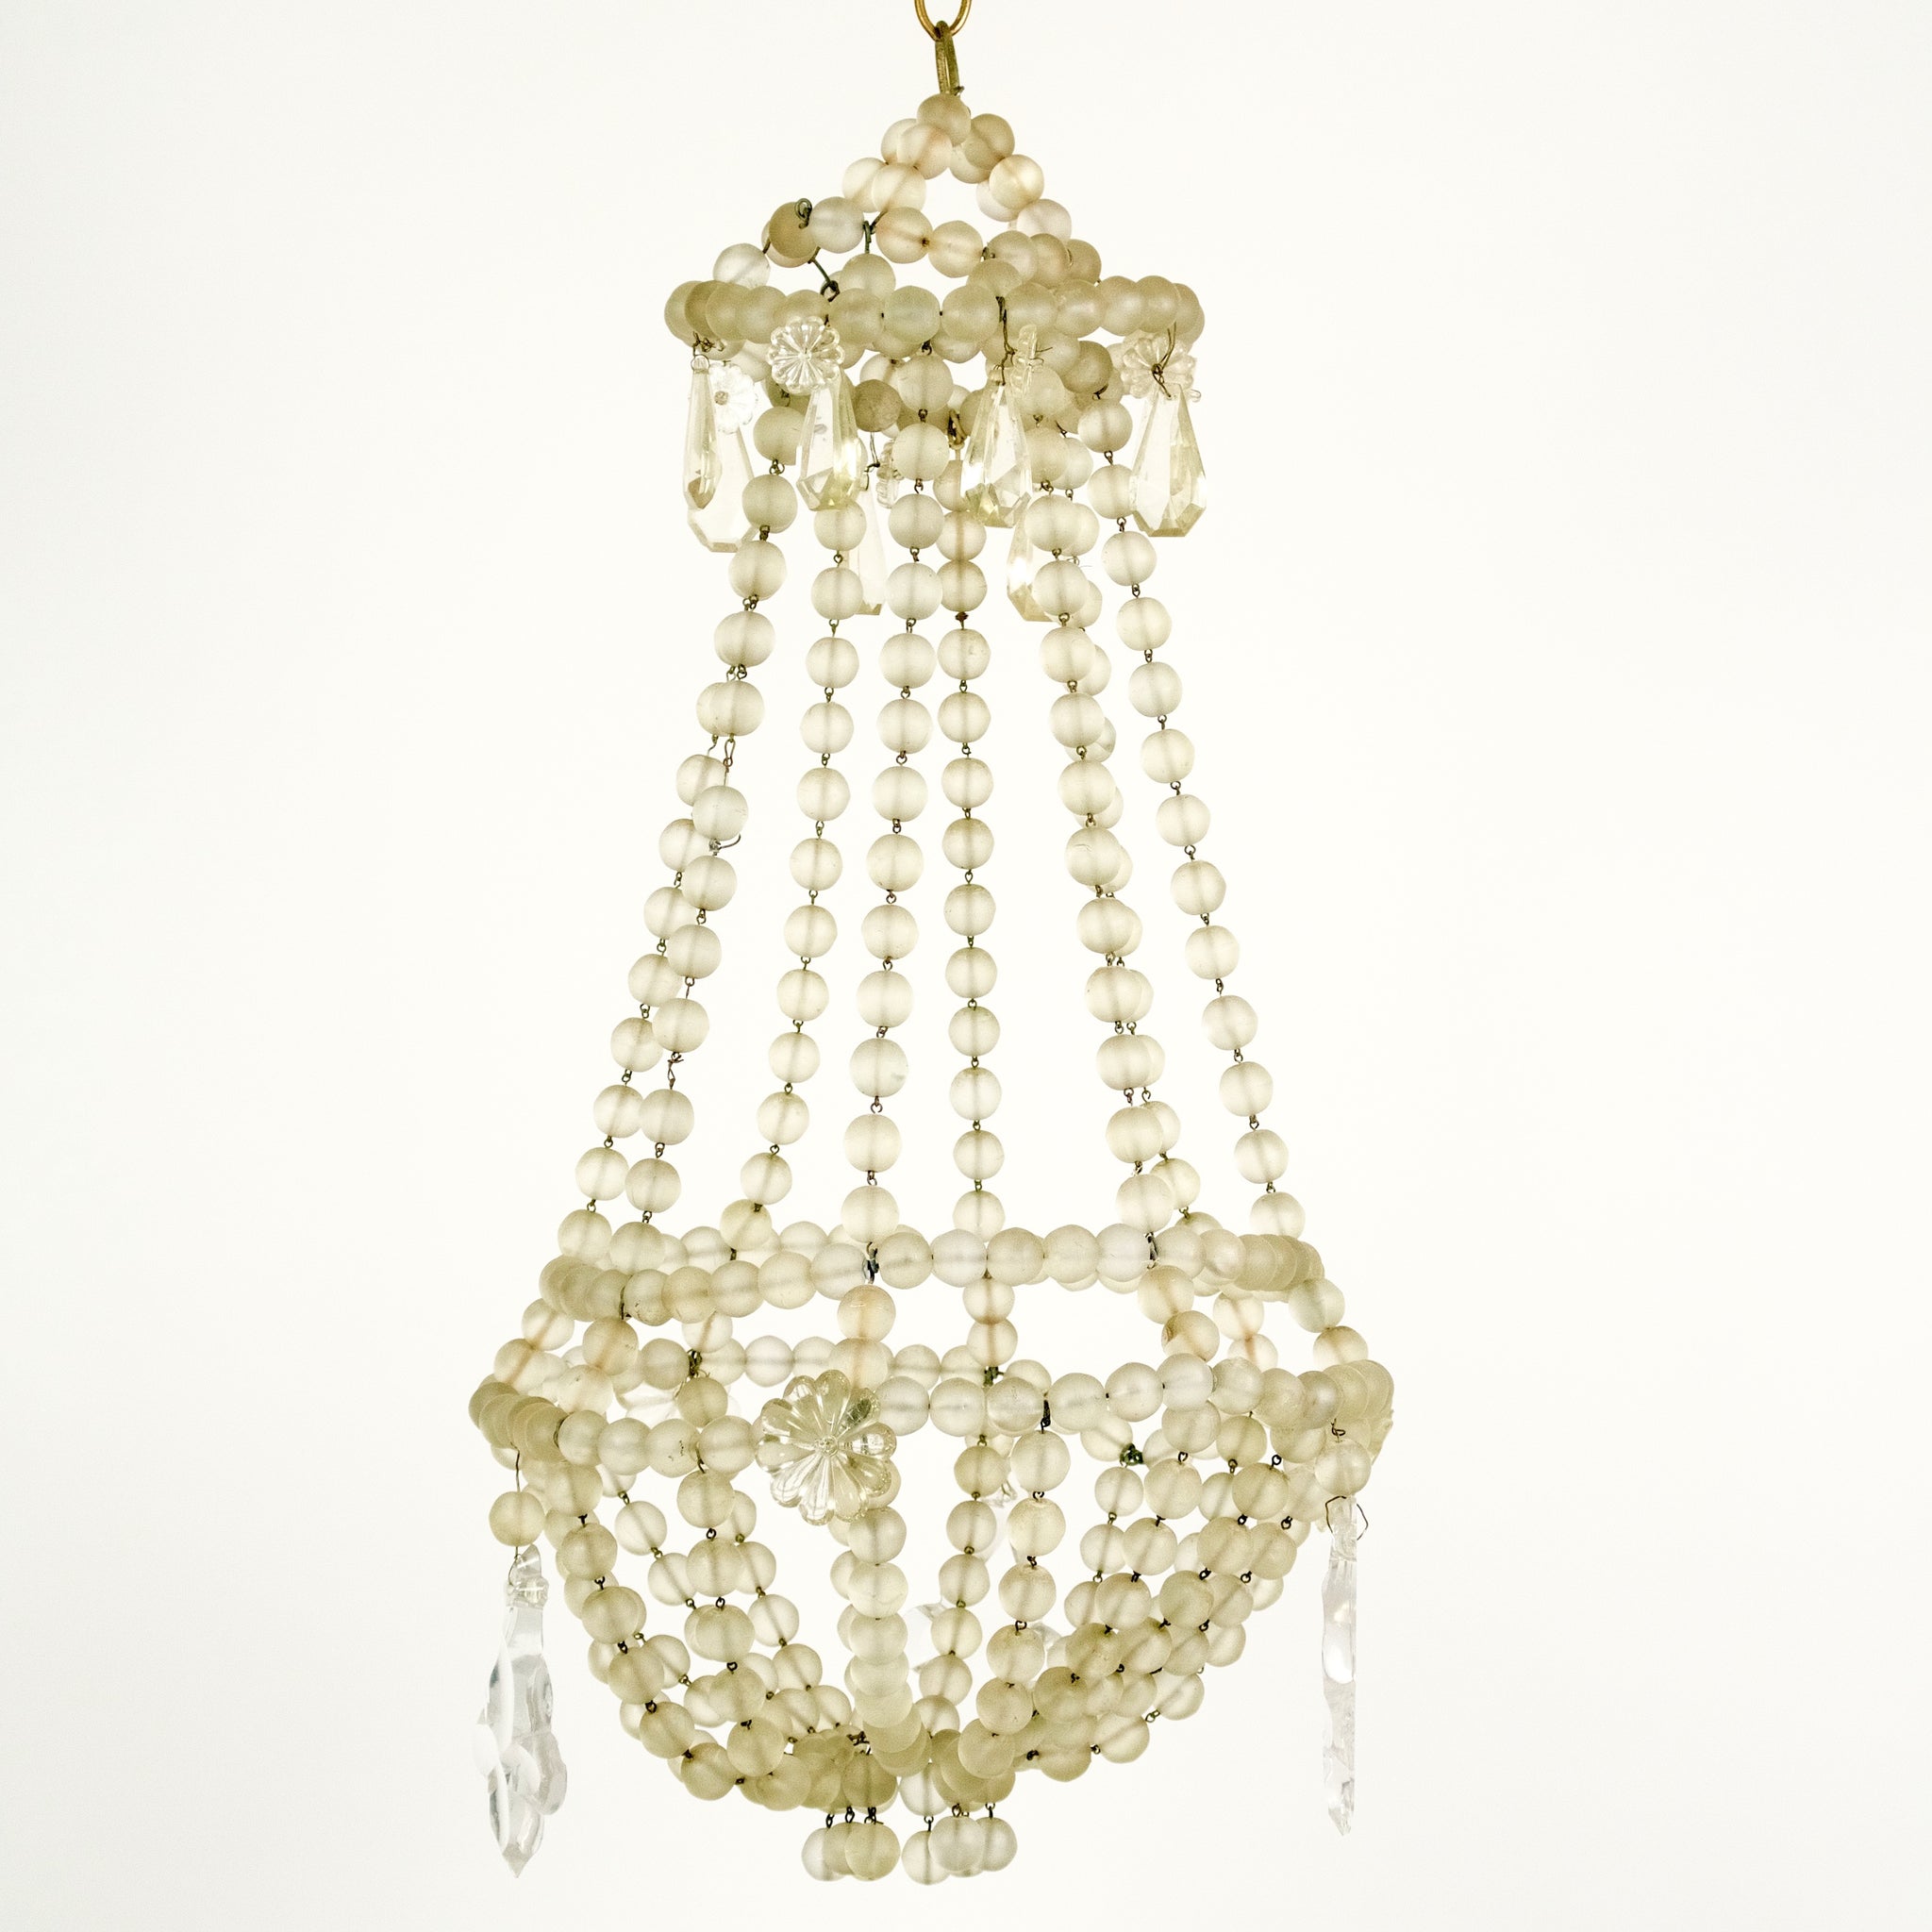 Very decorative vintage French beaded glass chandelier .